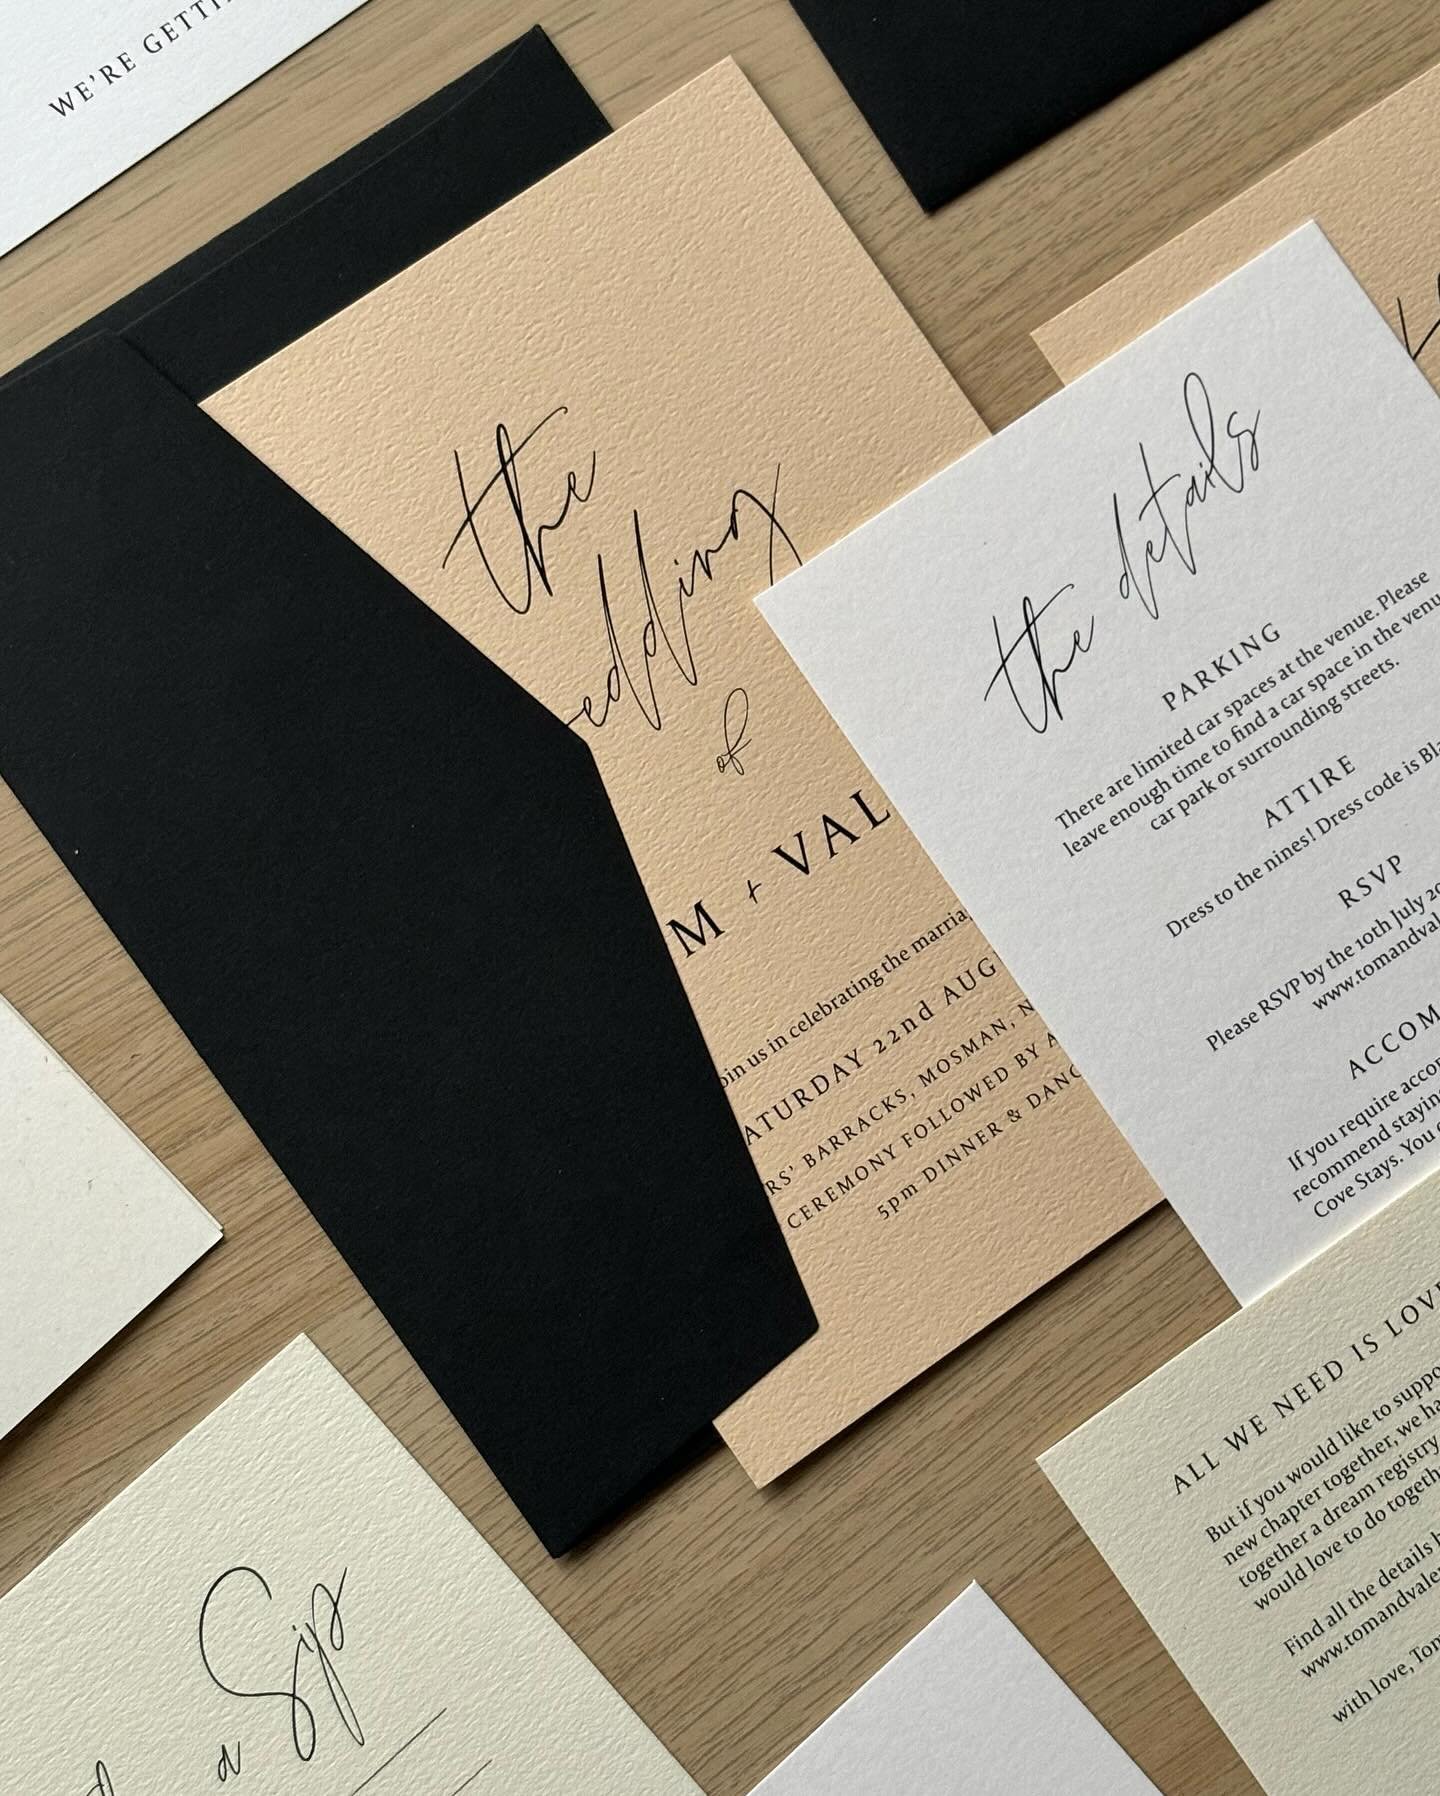 This one&rsquo;s for the modern romantics! 🤍🥖 This &lsquo;French Beige&rsquo; suite is the newest Semi-Custom event stationery suite that is available from my website now.

Semi-custom suites are stationery suites that have been pre-designed so you